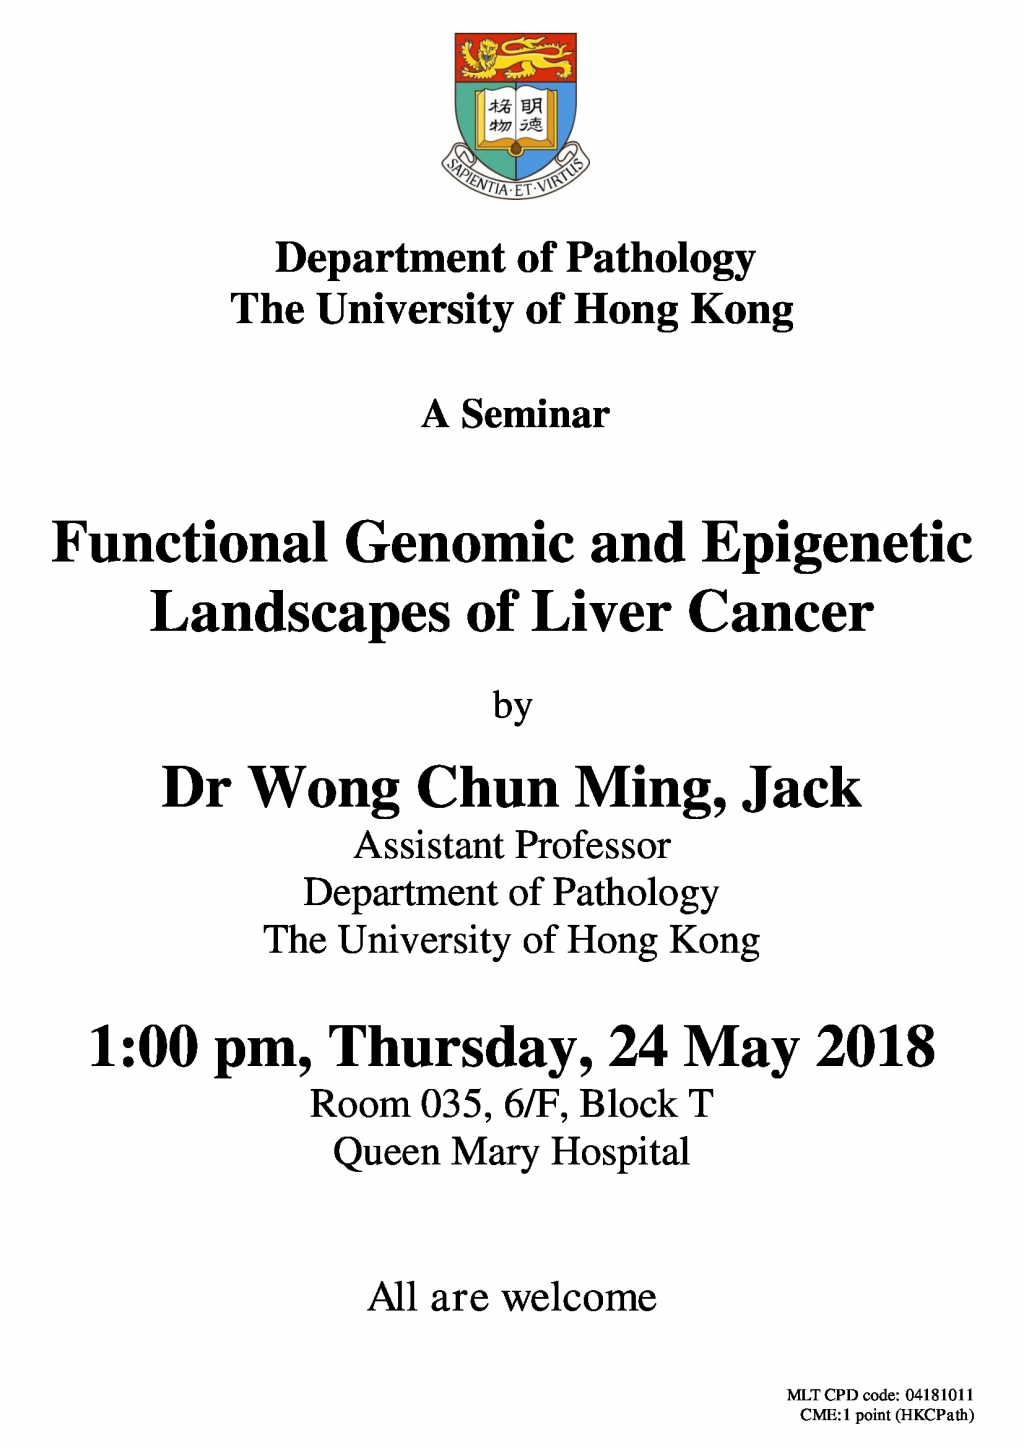 A Seminar on Functional Genomic and Epigenetic Landscapes of Liver Cancer by Dr Jack Wong on 24 May (1 pm)